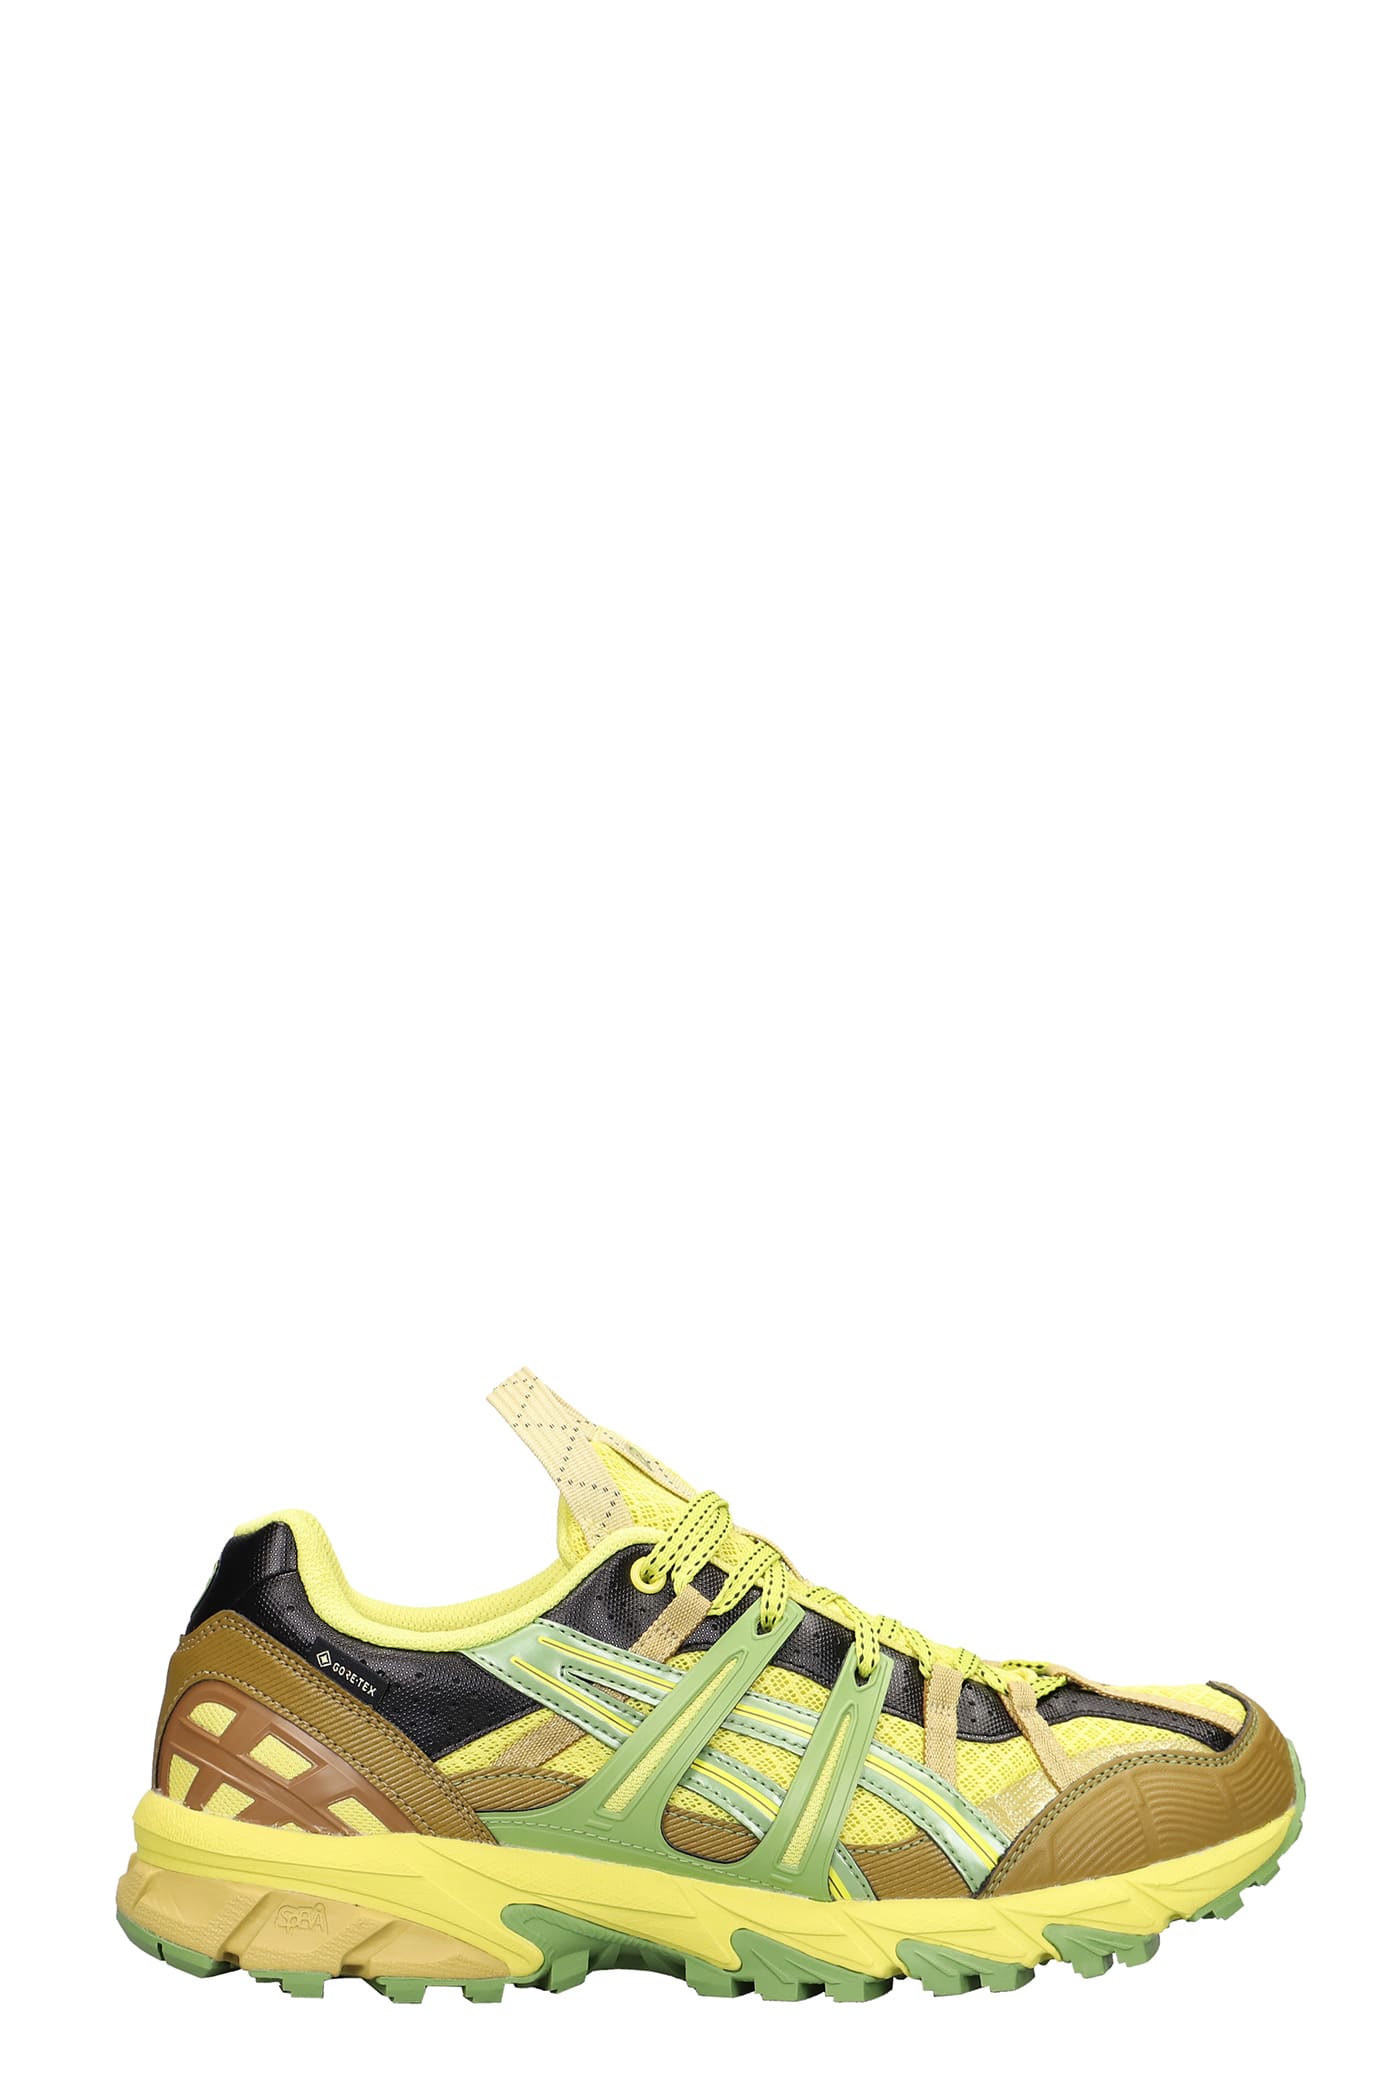 Asics Hs4 Gel-sonoma Sneakers In Yellow Synthetic Fibers